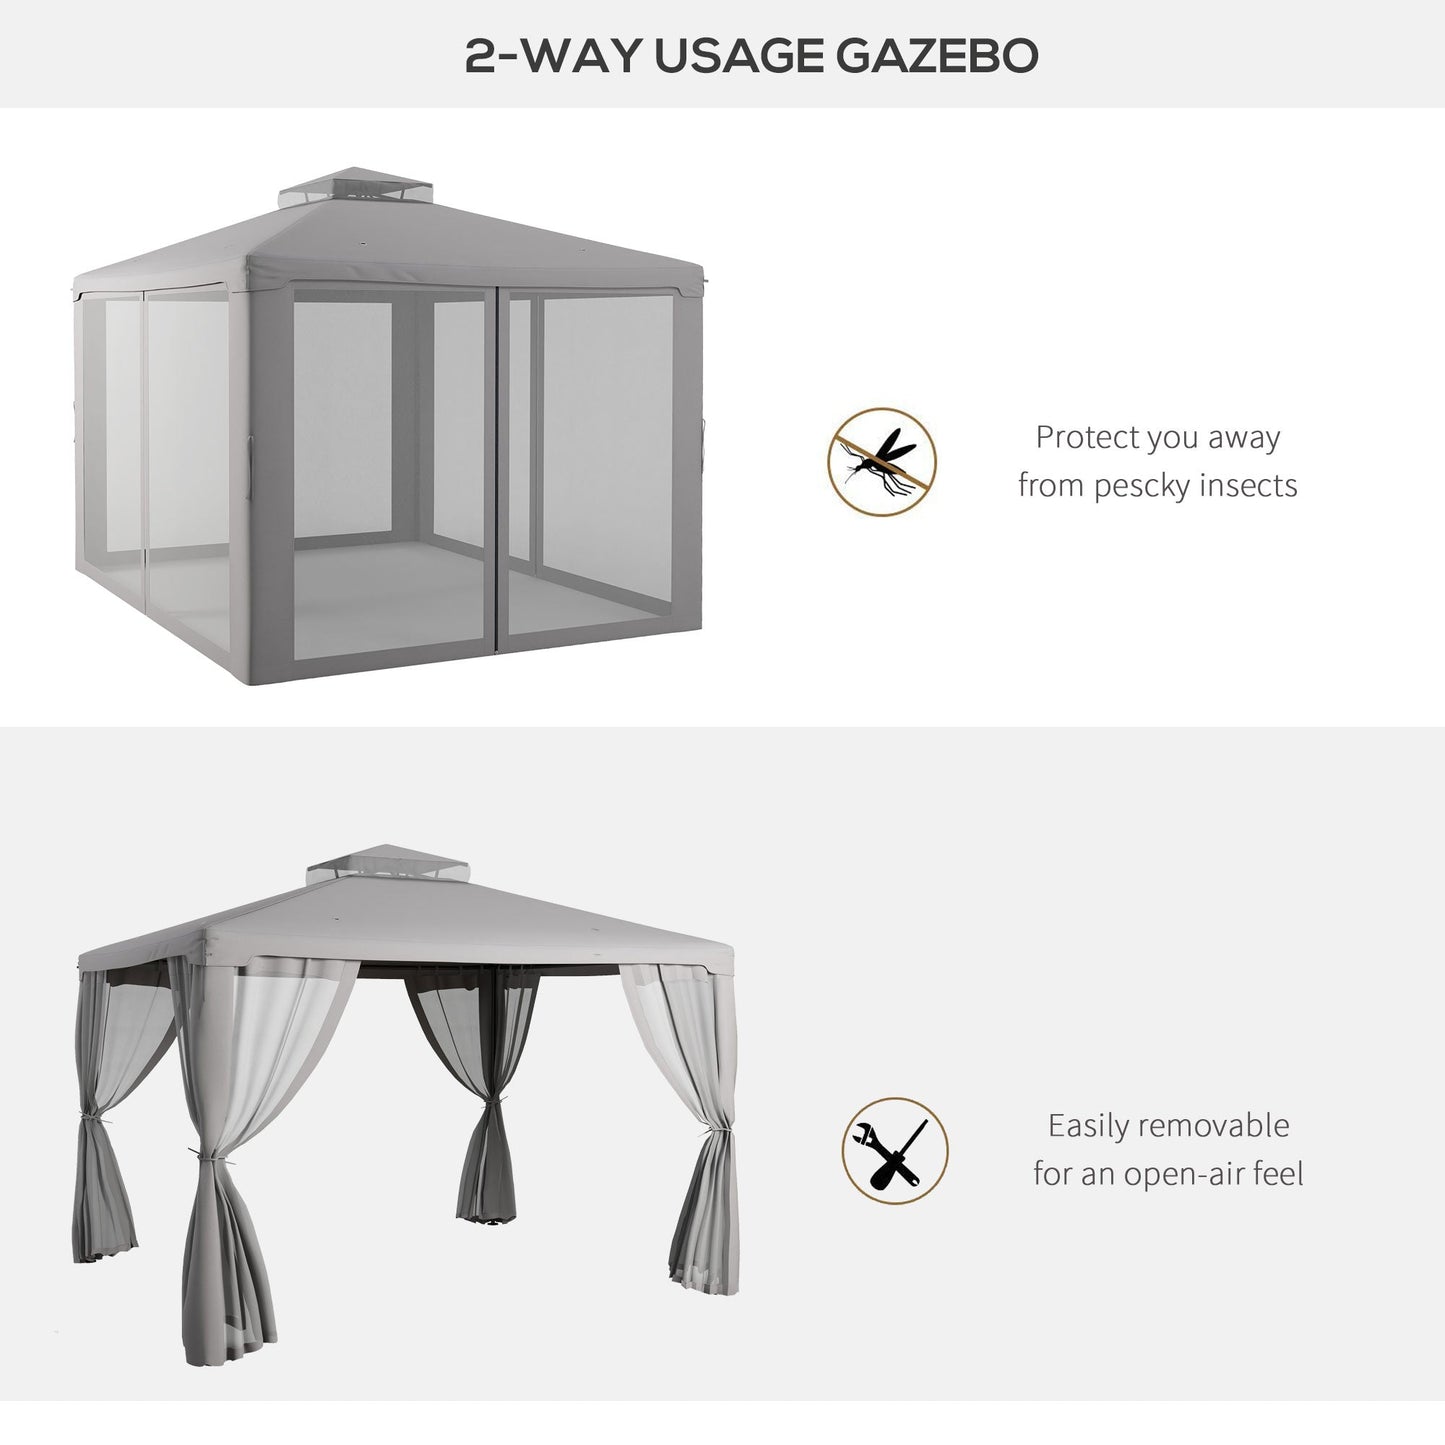 -Outsunny 10' x 12' Patio Gazebo Outdoor Canopy Shelter with 2-Tier Roof and Netting, Steel Frame for Garden, Gray - Outdoor Style Company